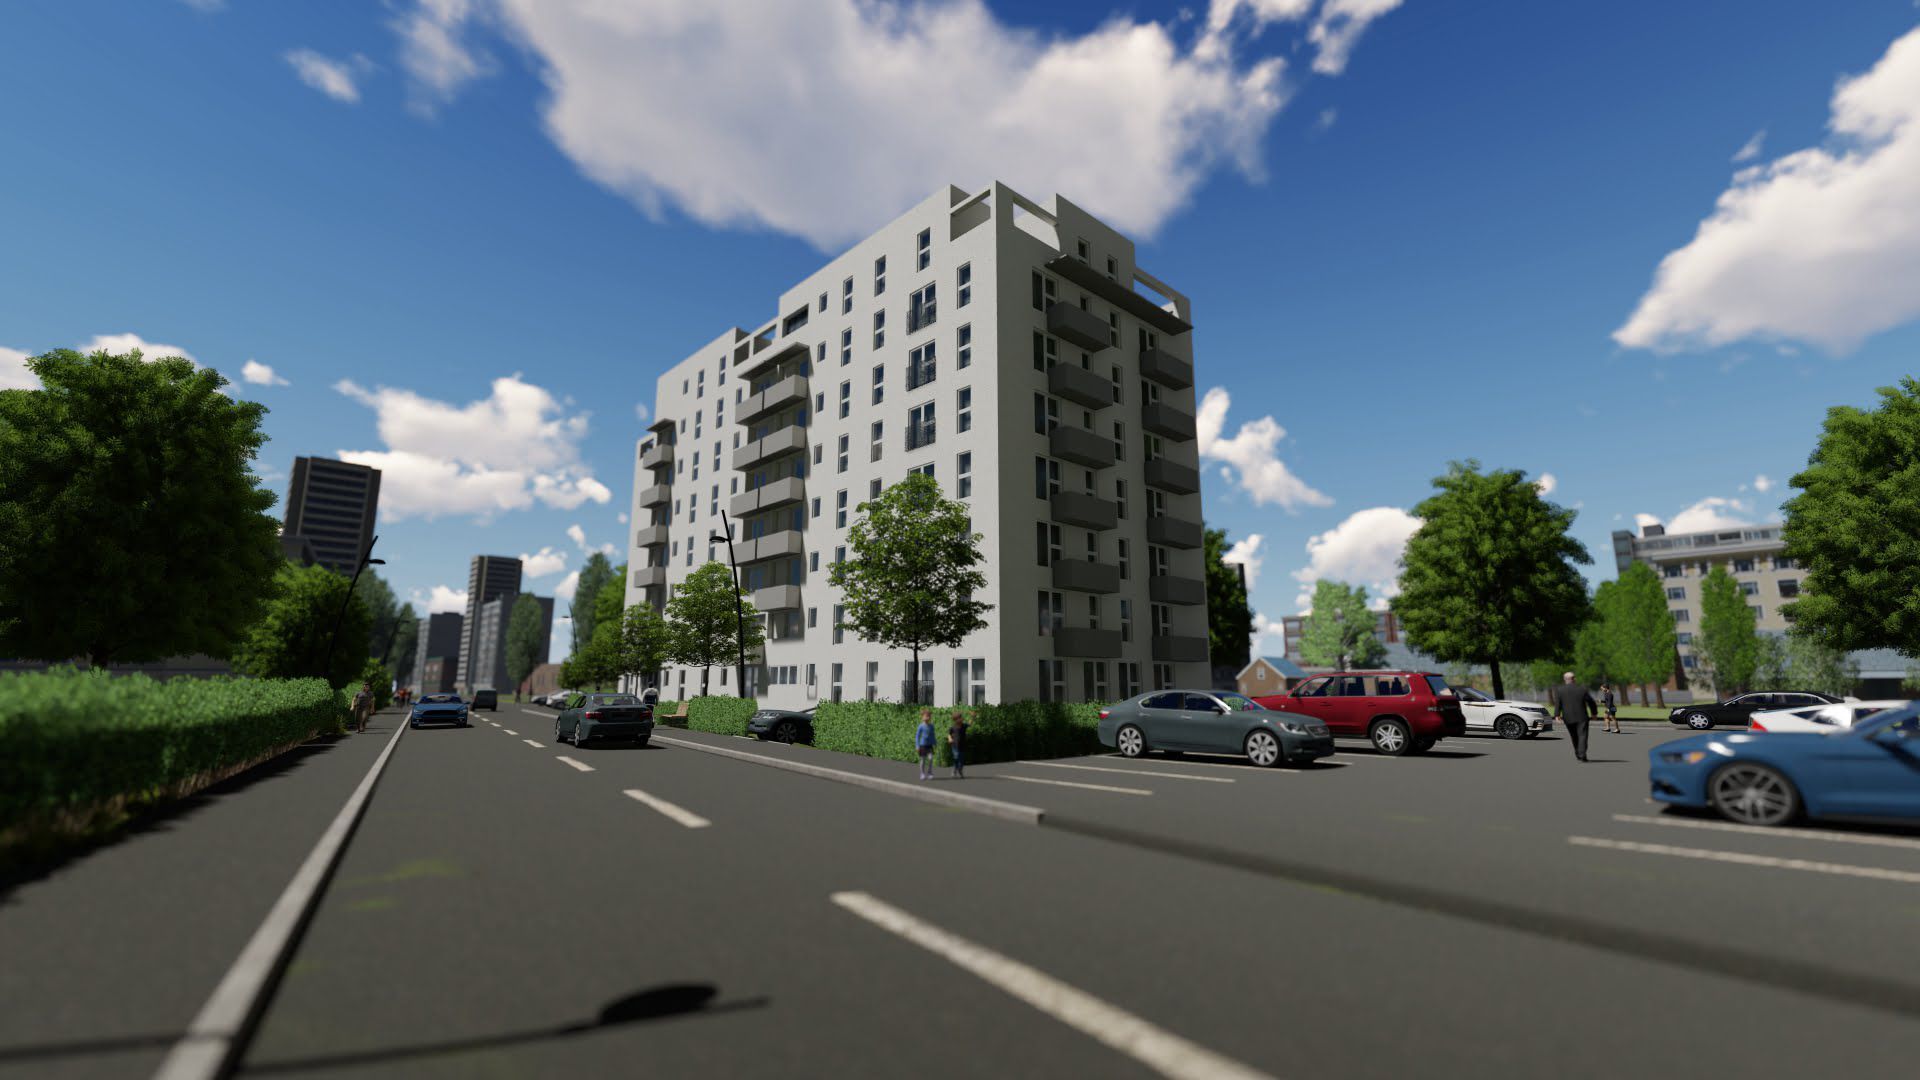 LAND PIPERA I 2500 MP P 6 I NEAR LIDL, RESIDENTIAL DISTRICTS